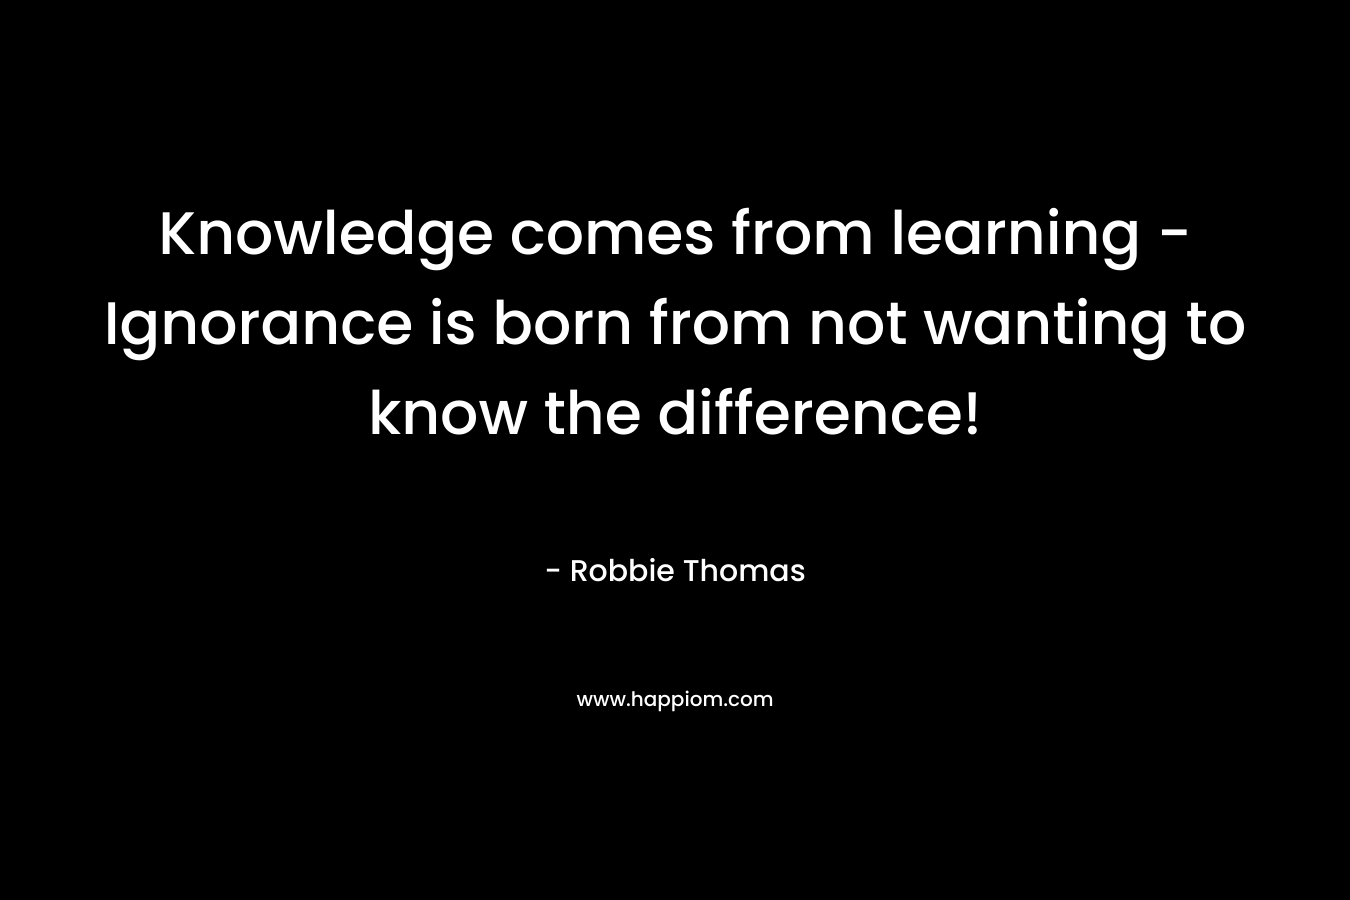 Knowledge comes from learning - Ignorance is born from not wanting to know the difference!